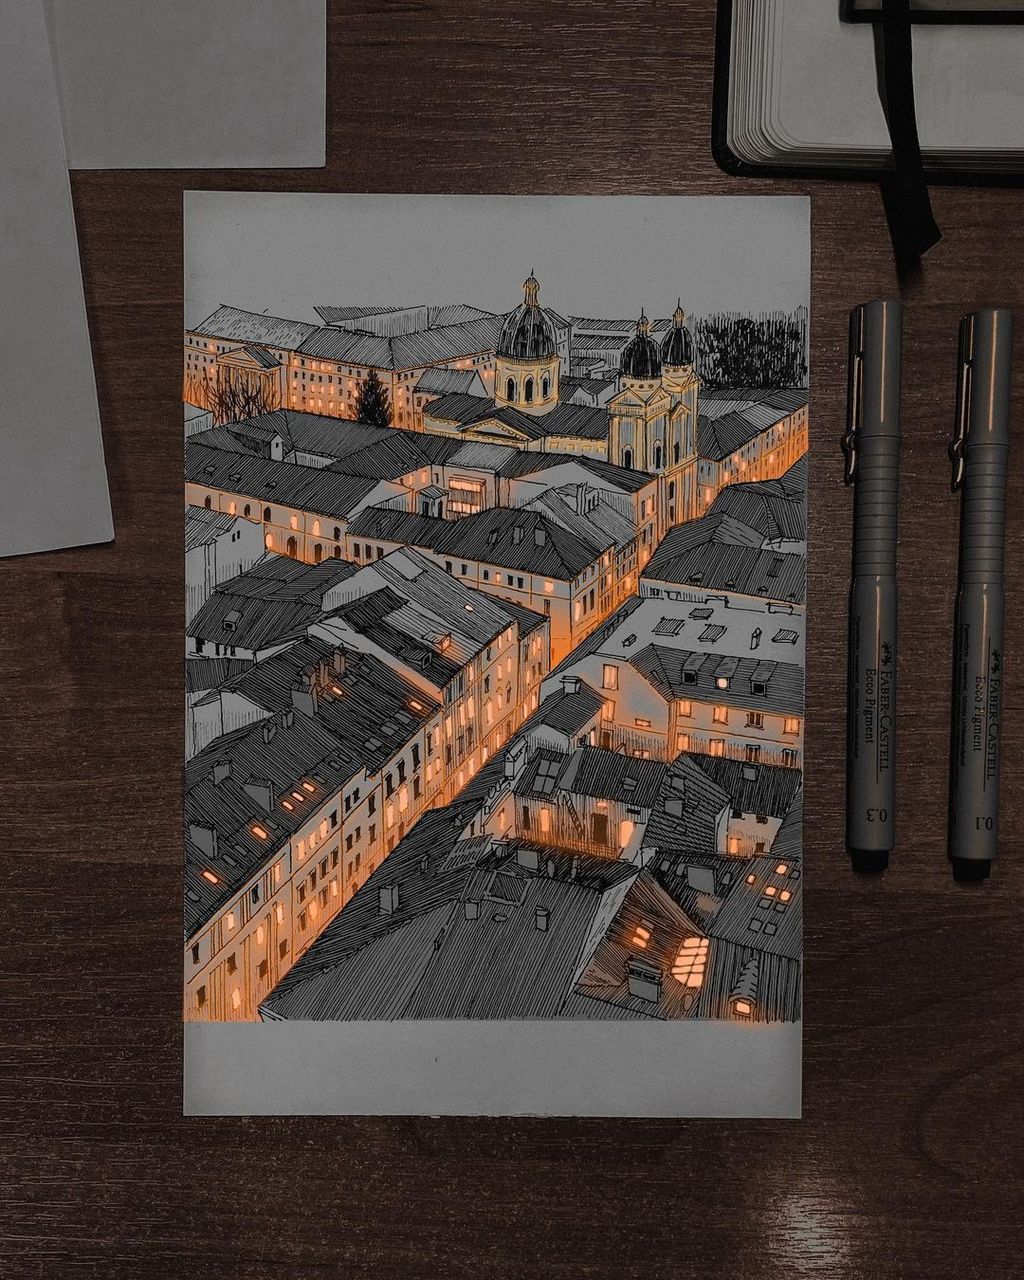 Forrás: Instagram/citiesandsketches